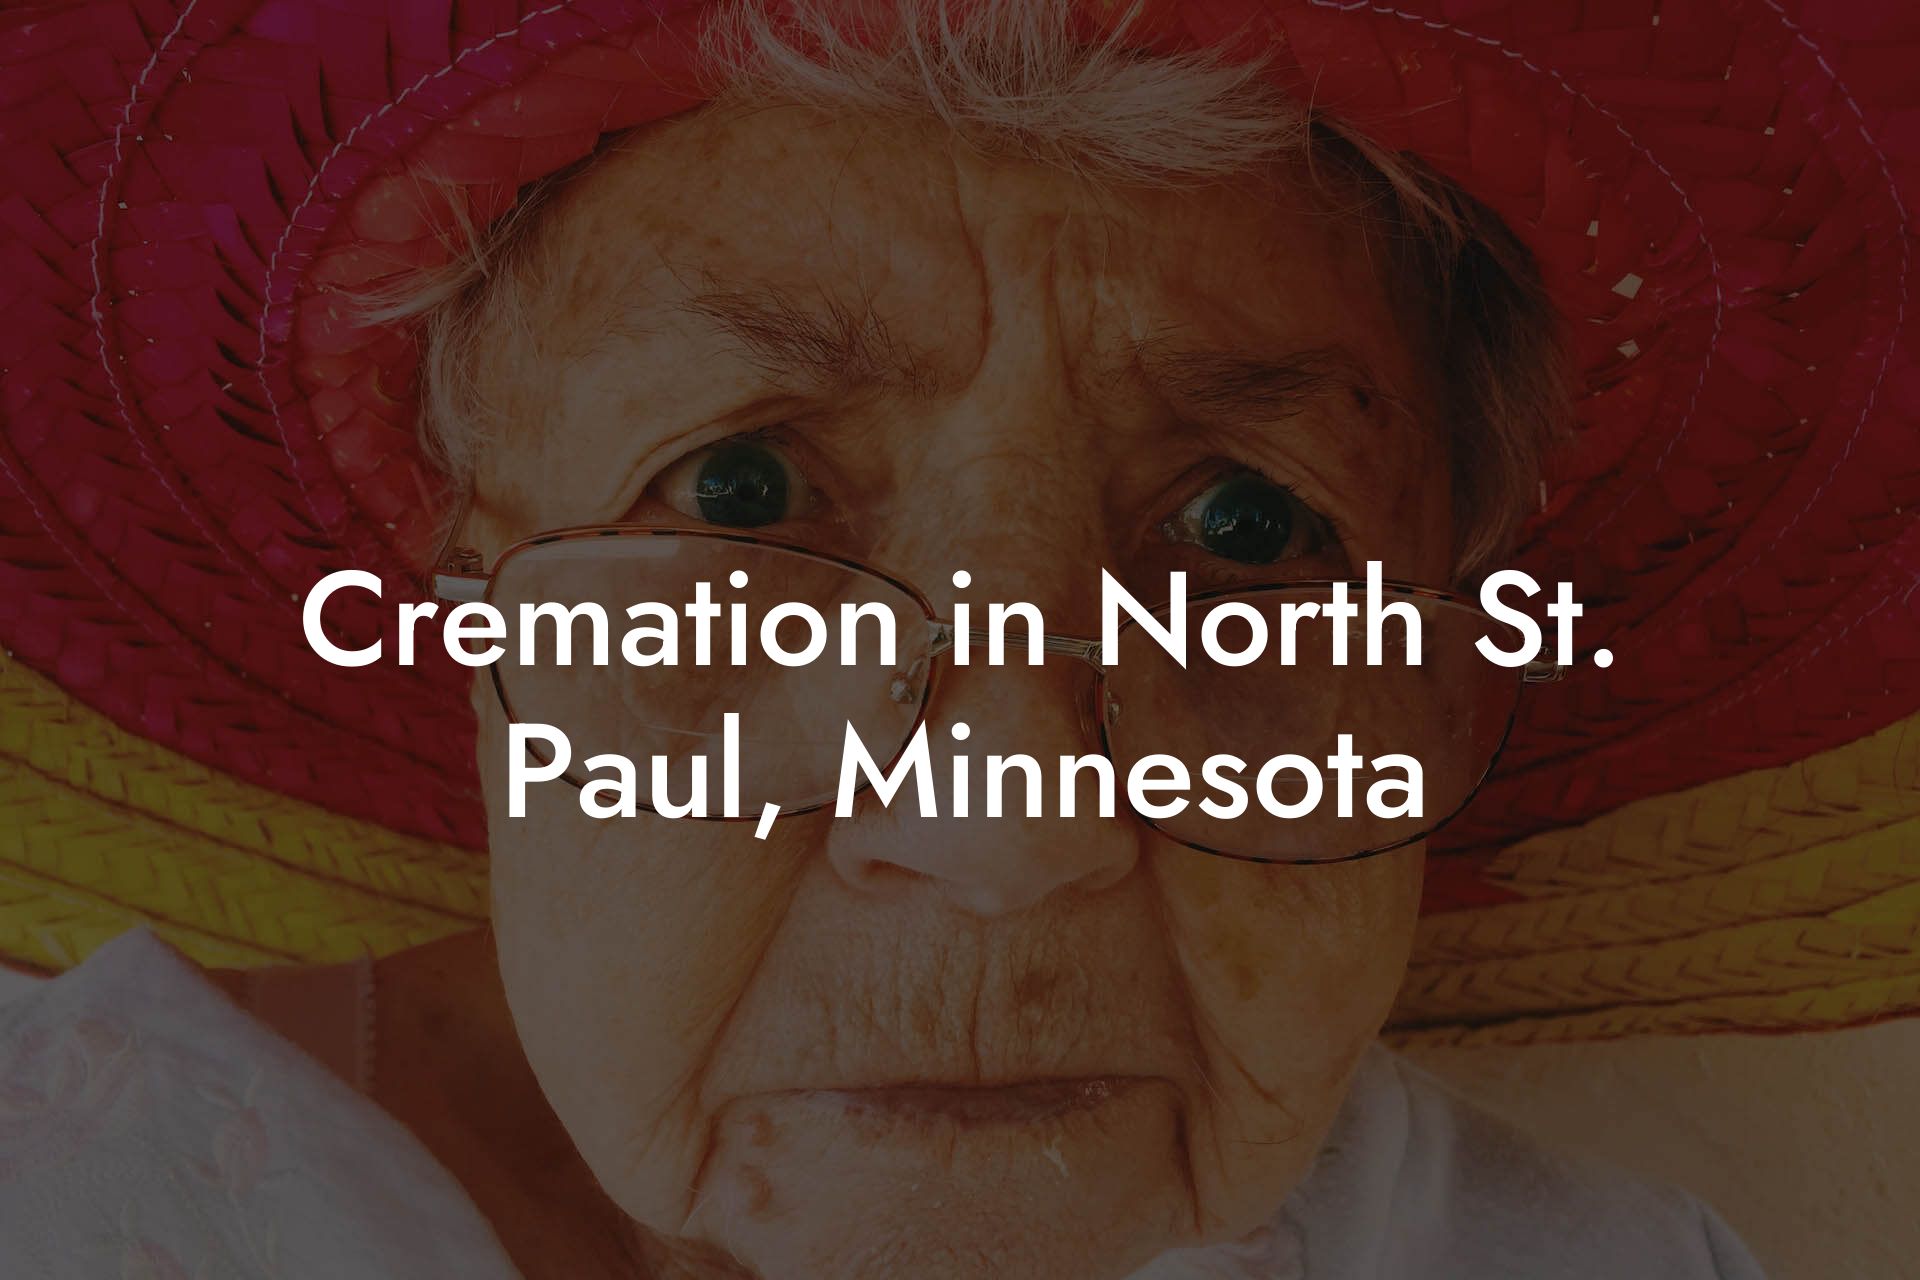 Cremation in North St. Paul, Minnesota